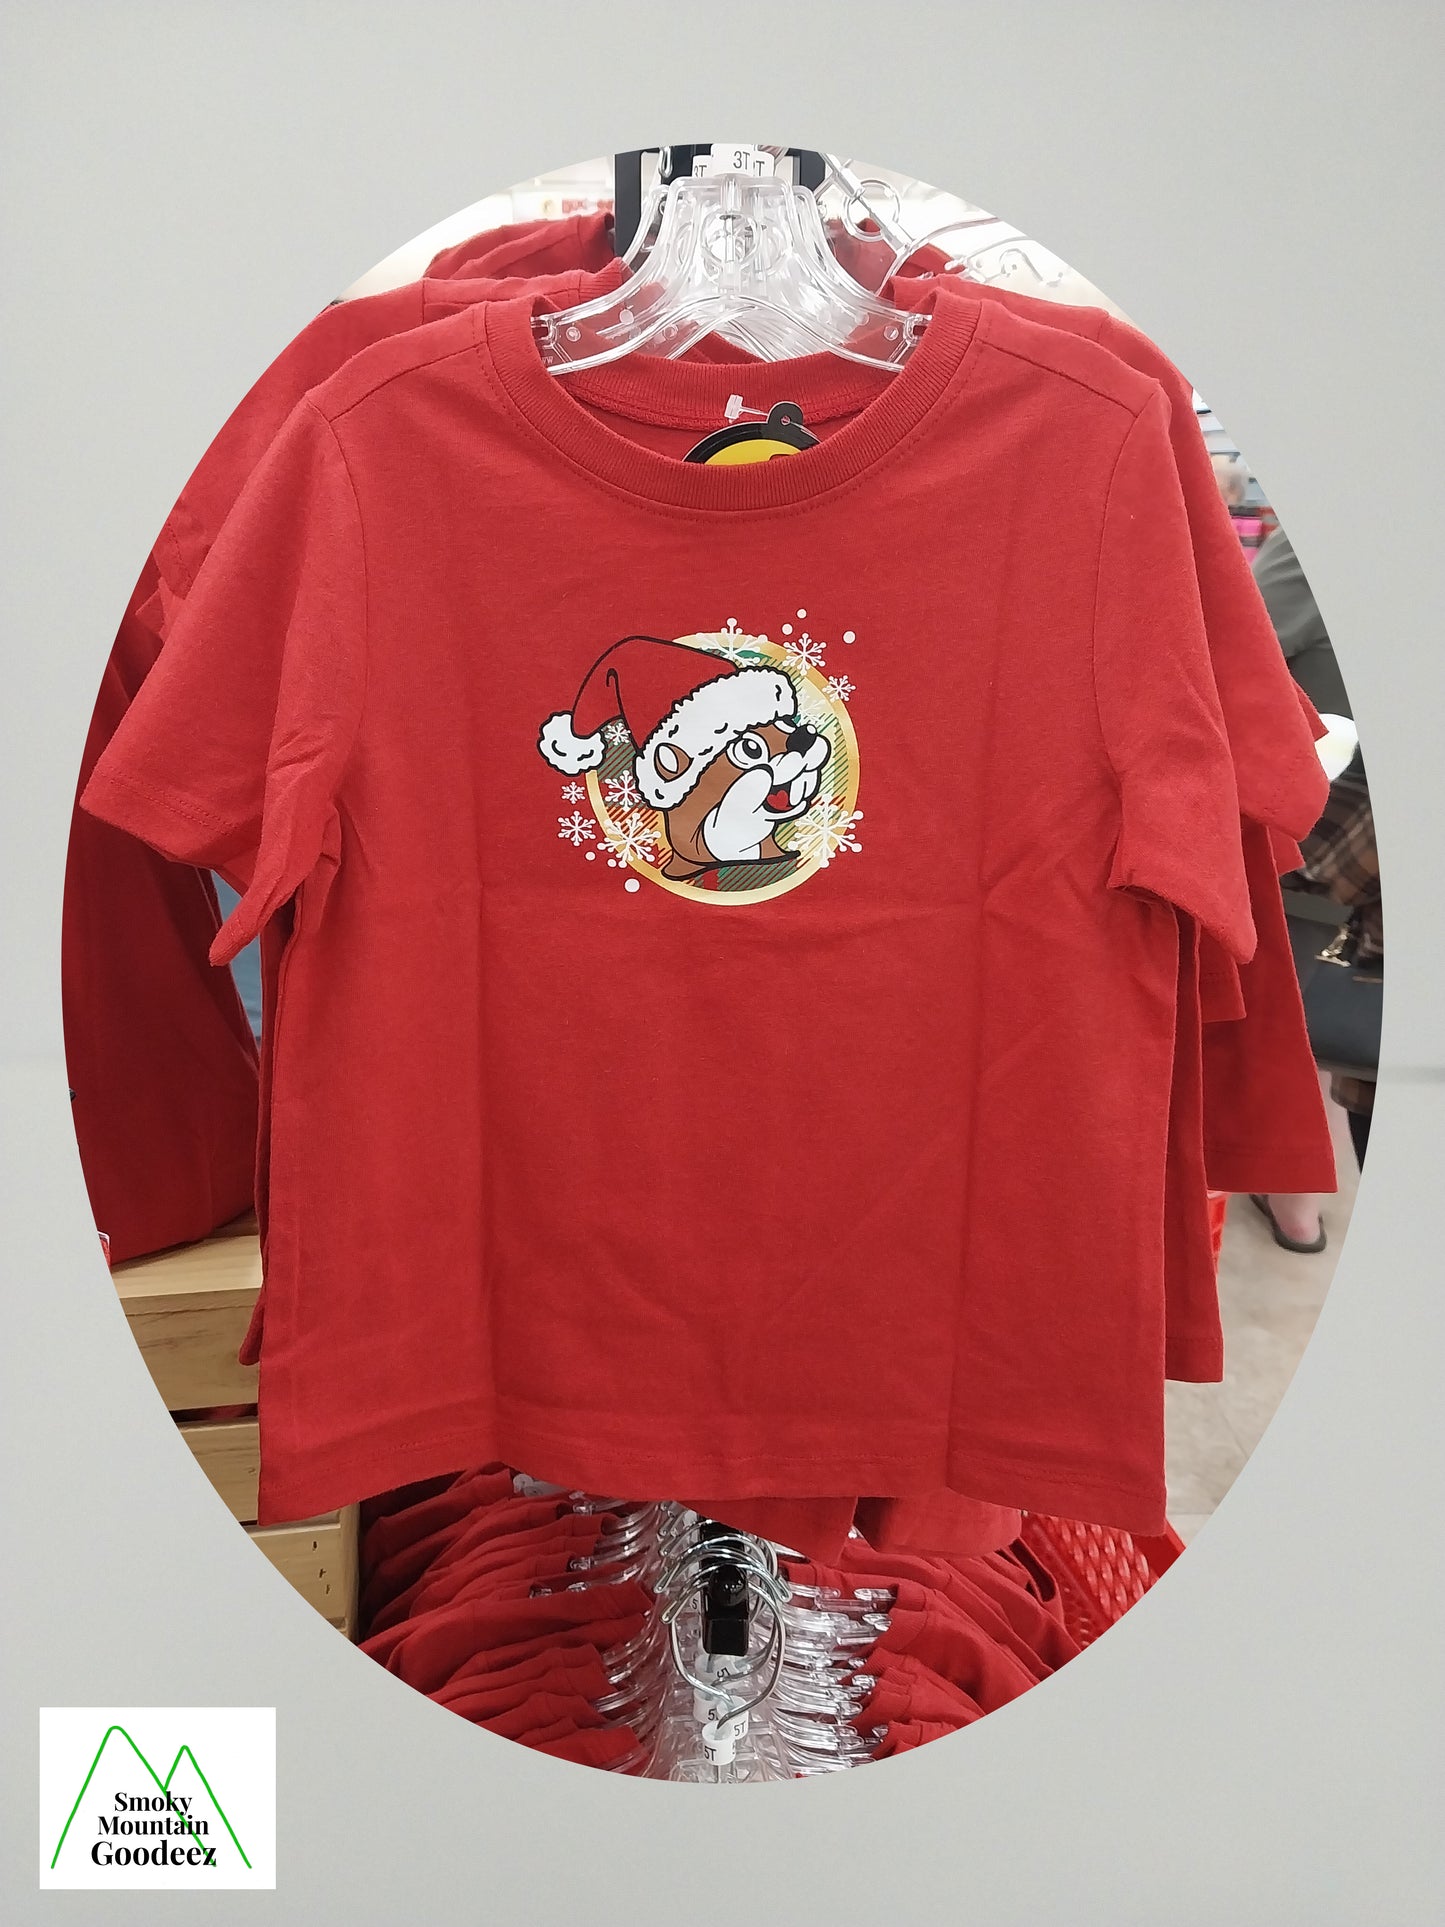 Buc-ee's Christmas Holiday Shirt "It's Beginning to Look a Lot Like Buc-ee's 2023"